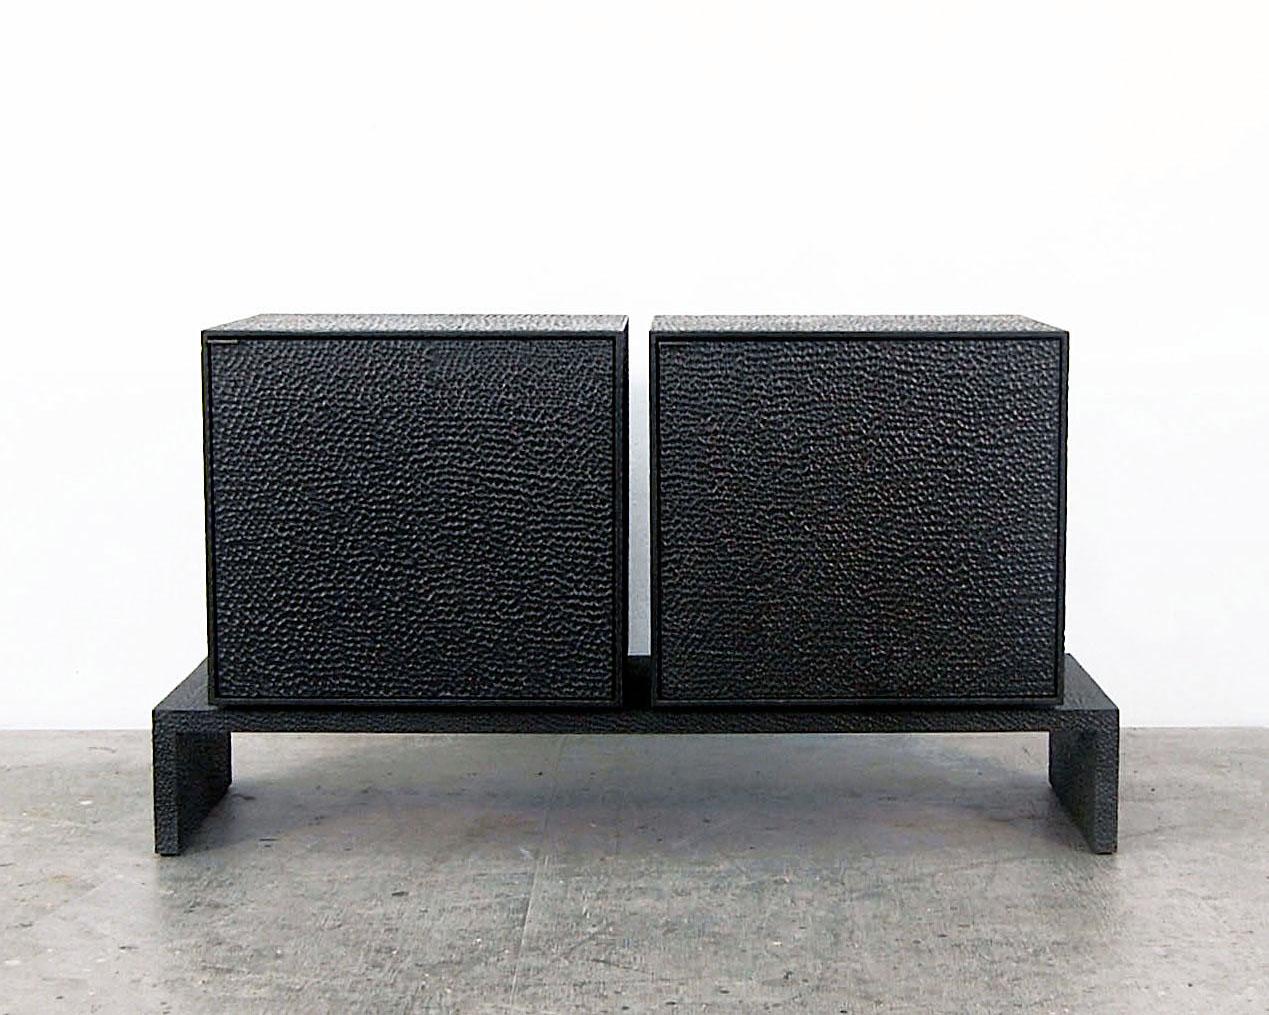 M2 credenza cabinet by John Eric Byers
Dimensions: D 71 x W 132 x H 46 cm
Materials: carved + blackened + maple + brass

All works are individually handmade to order.

John Eric Byers creates geometrically inspired pieces that are minimal,